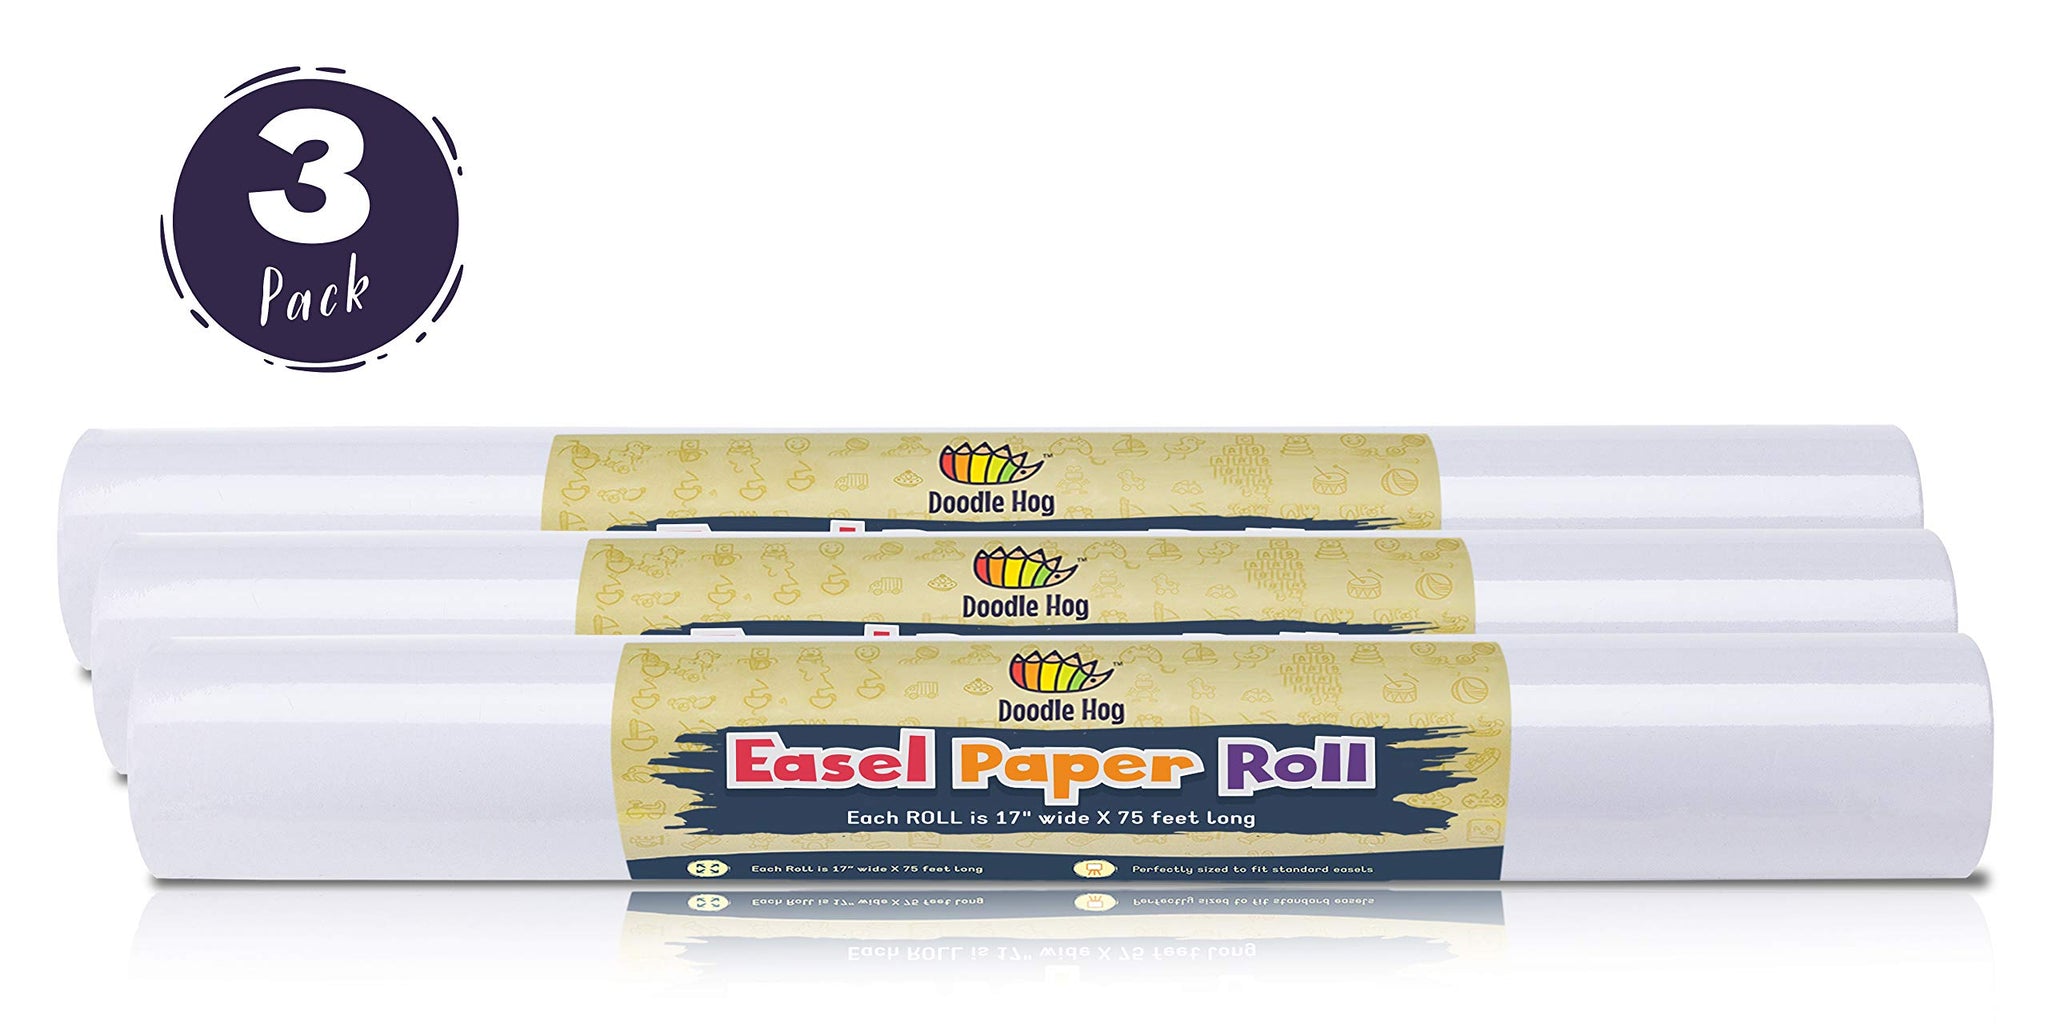 Melissa and & Doug 17 Easel Paper Roll 17 x 75 Feet